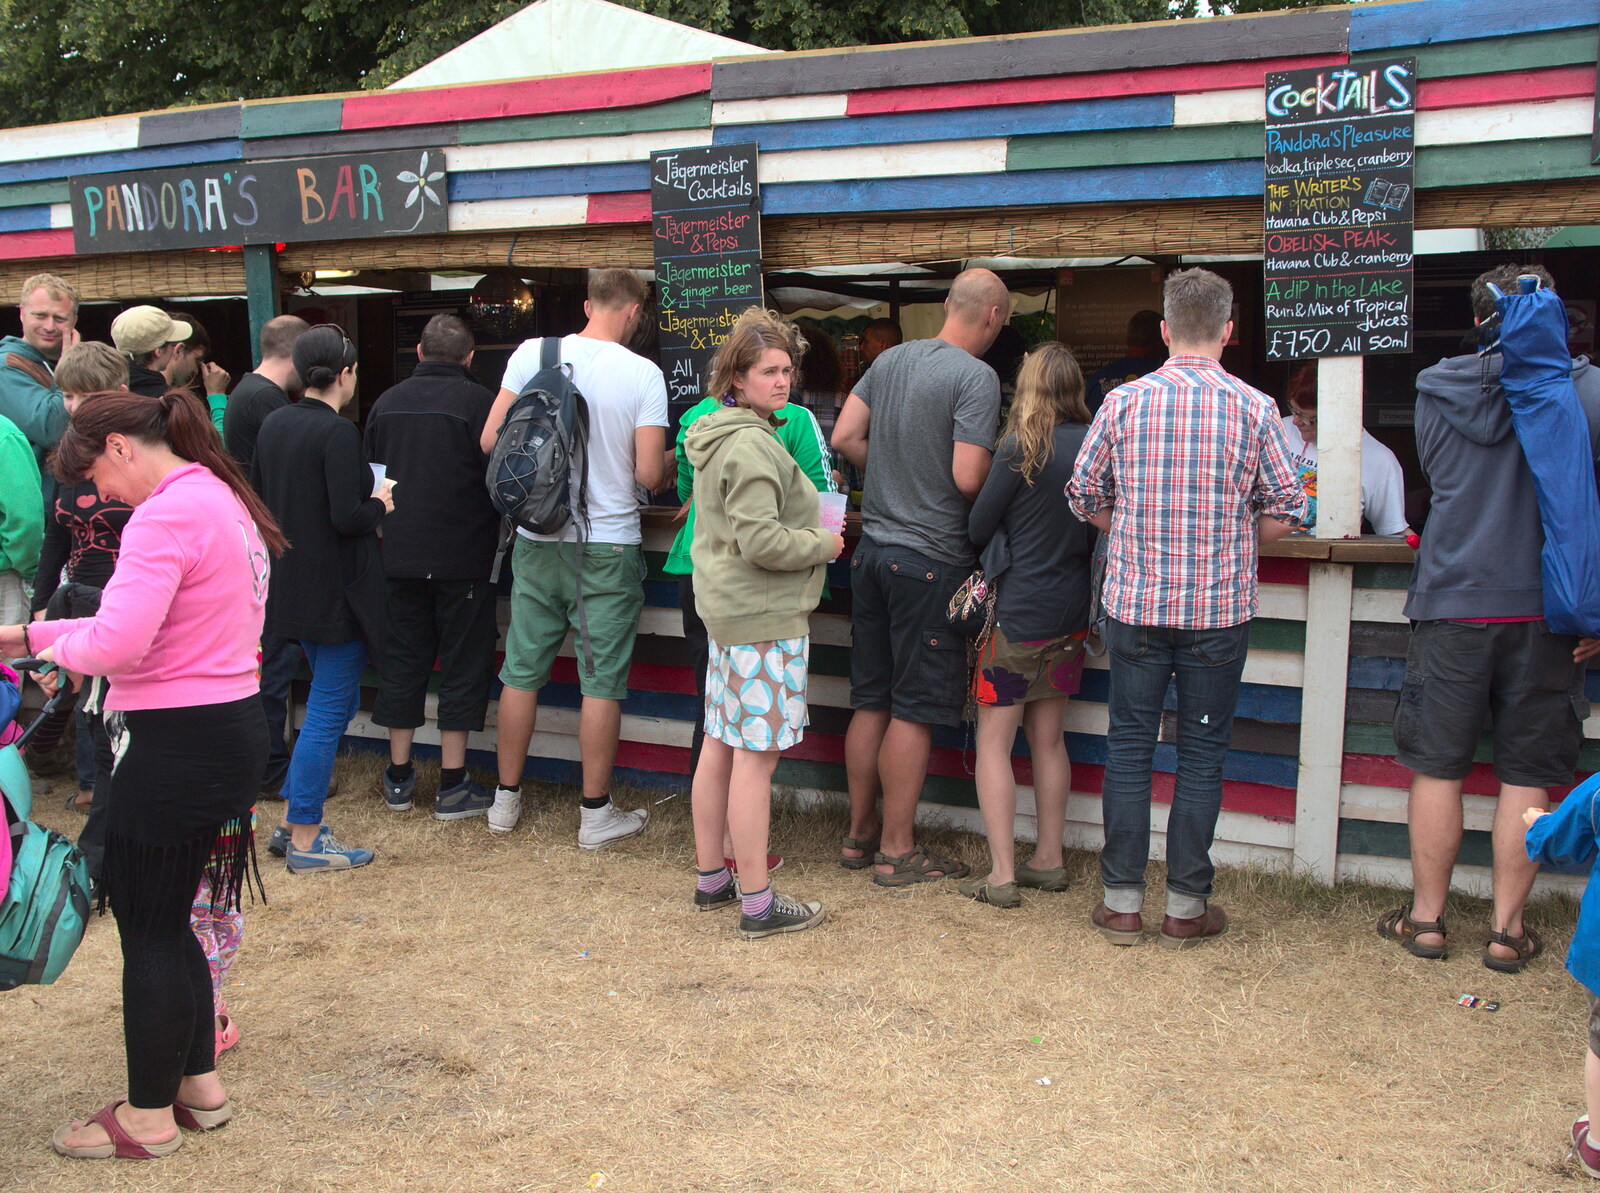 Isobel queues at the bar from The 8th Latitude Festival, Henham Park, Southwold, Suffolk - 18th July 2013